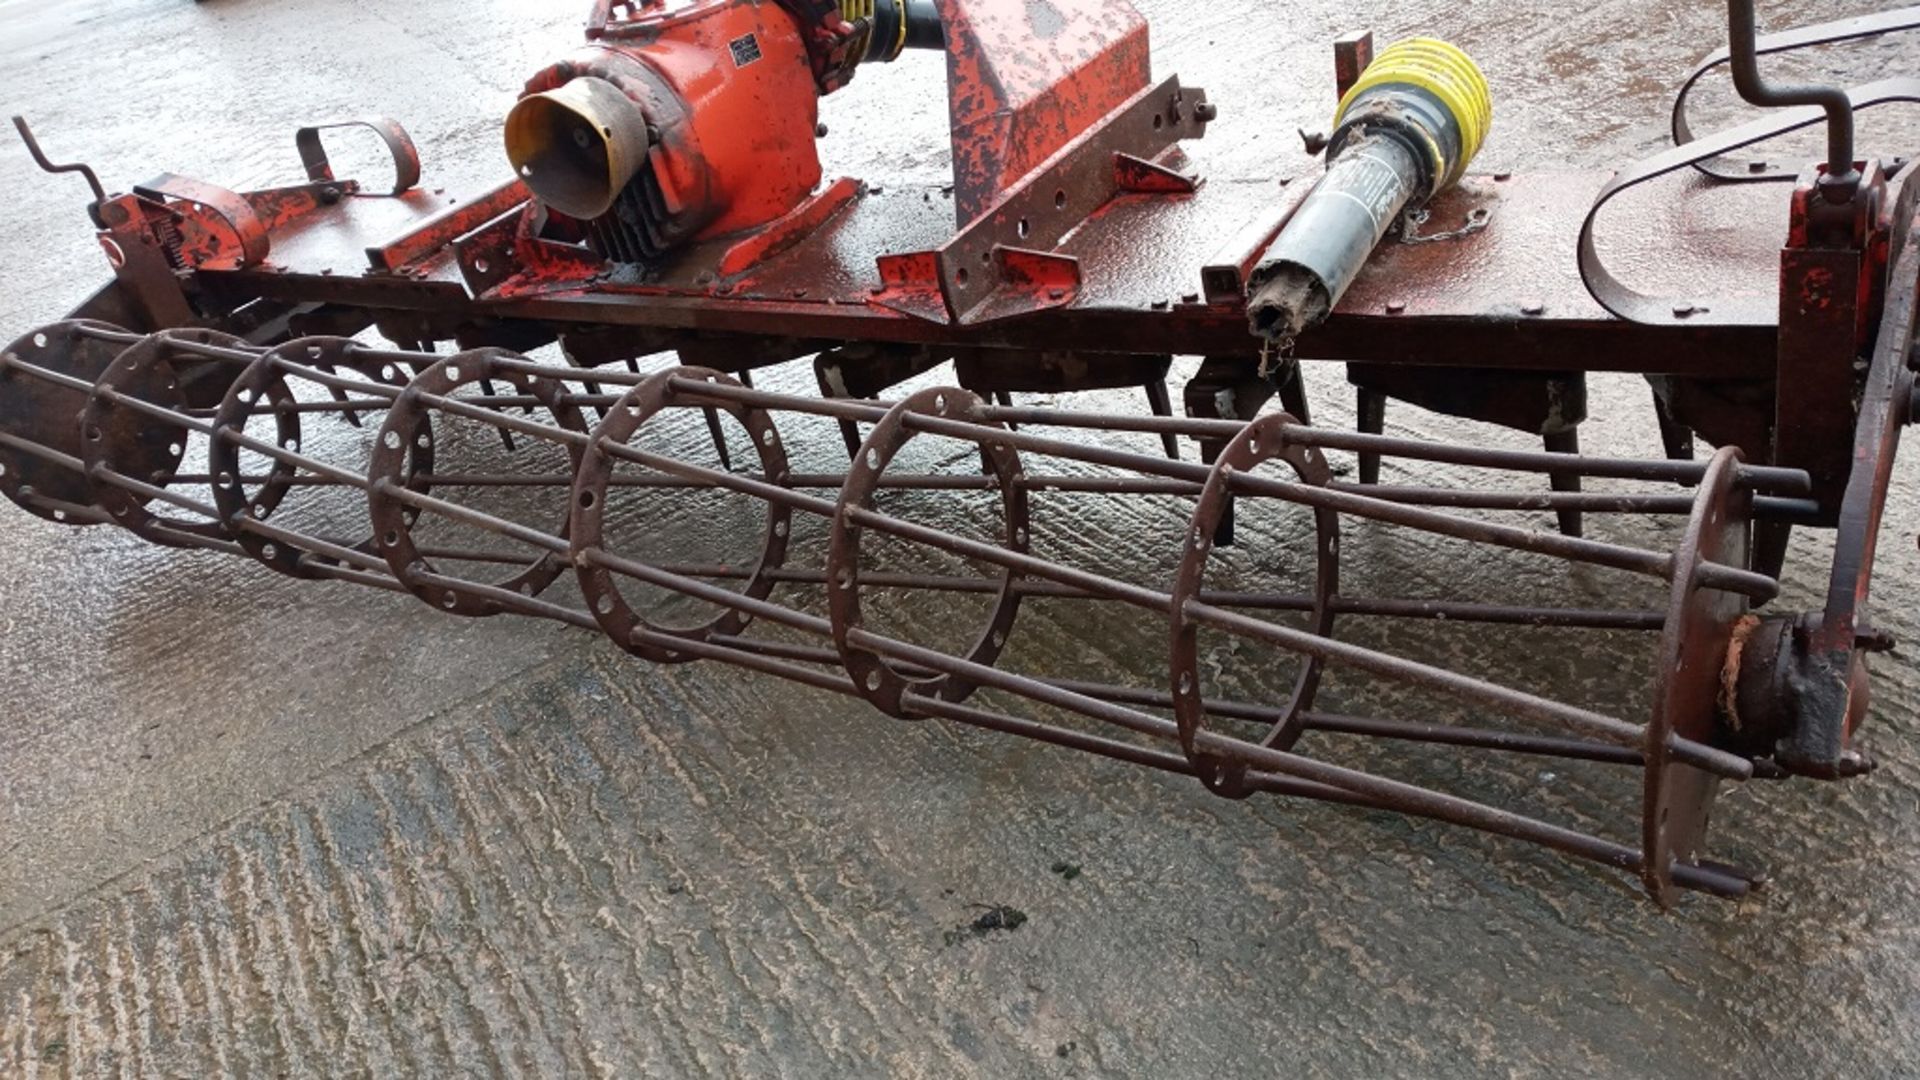 KUHN HR 300 POWER HARROW- 3 MTR WIDE + PTO SHAFT WITH NEW GUARDS